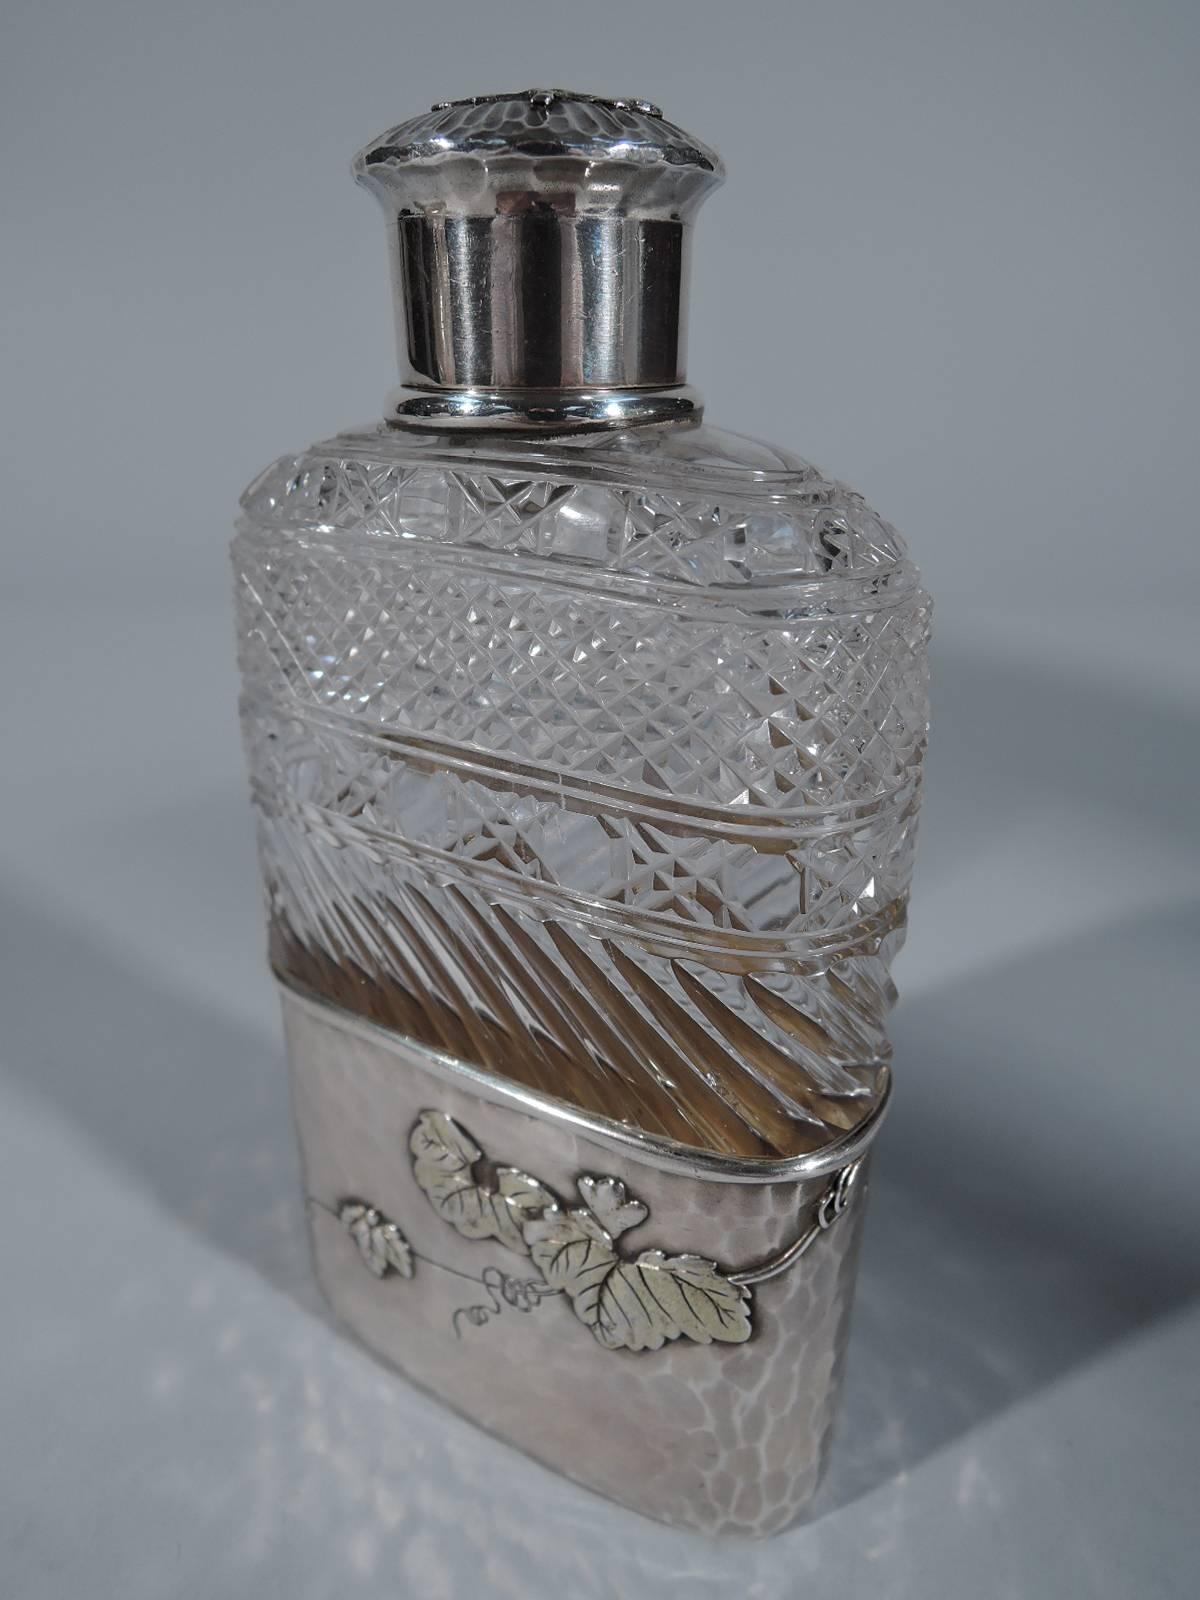 Japonisme Tiffany Japonesque Brilliant-Cut Glass and Applied Sterling Silver Flask